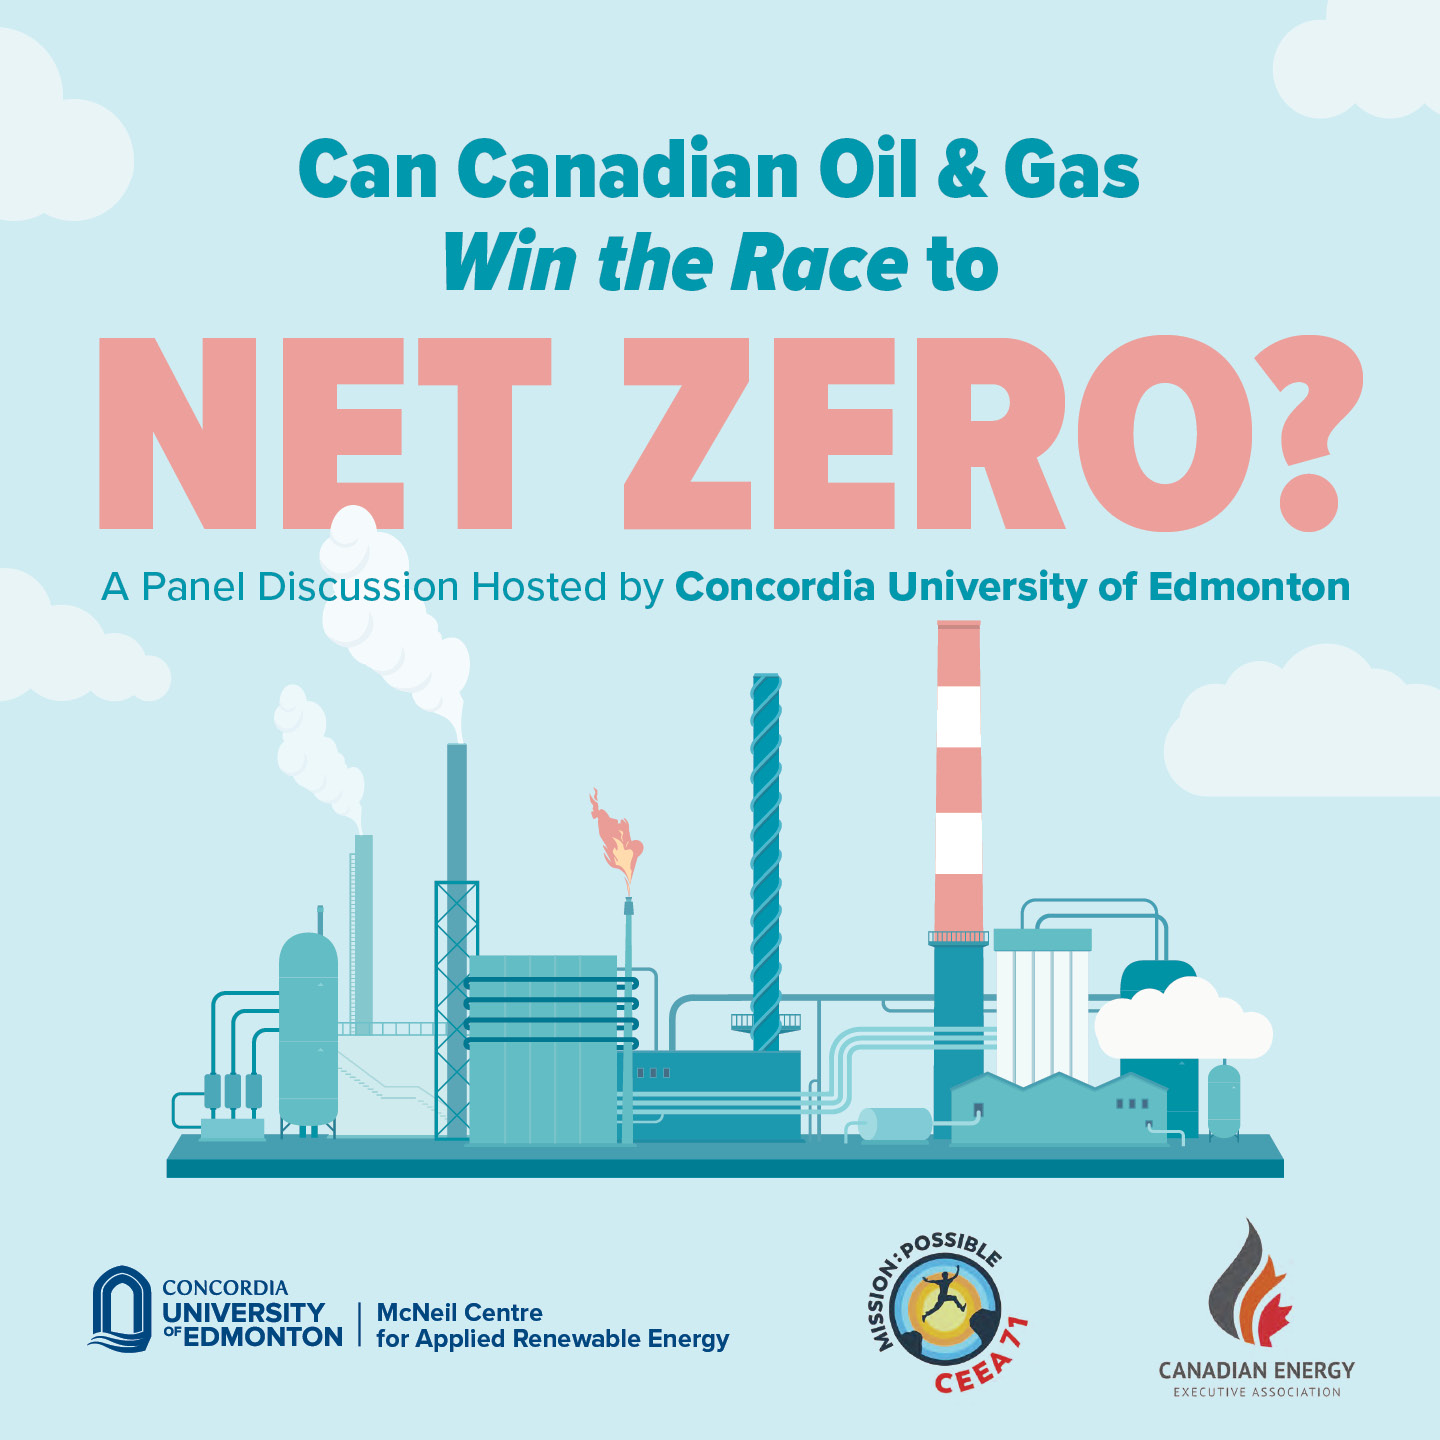 Can Canadian oil and gas win the race to net zero? A Panel Discussion